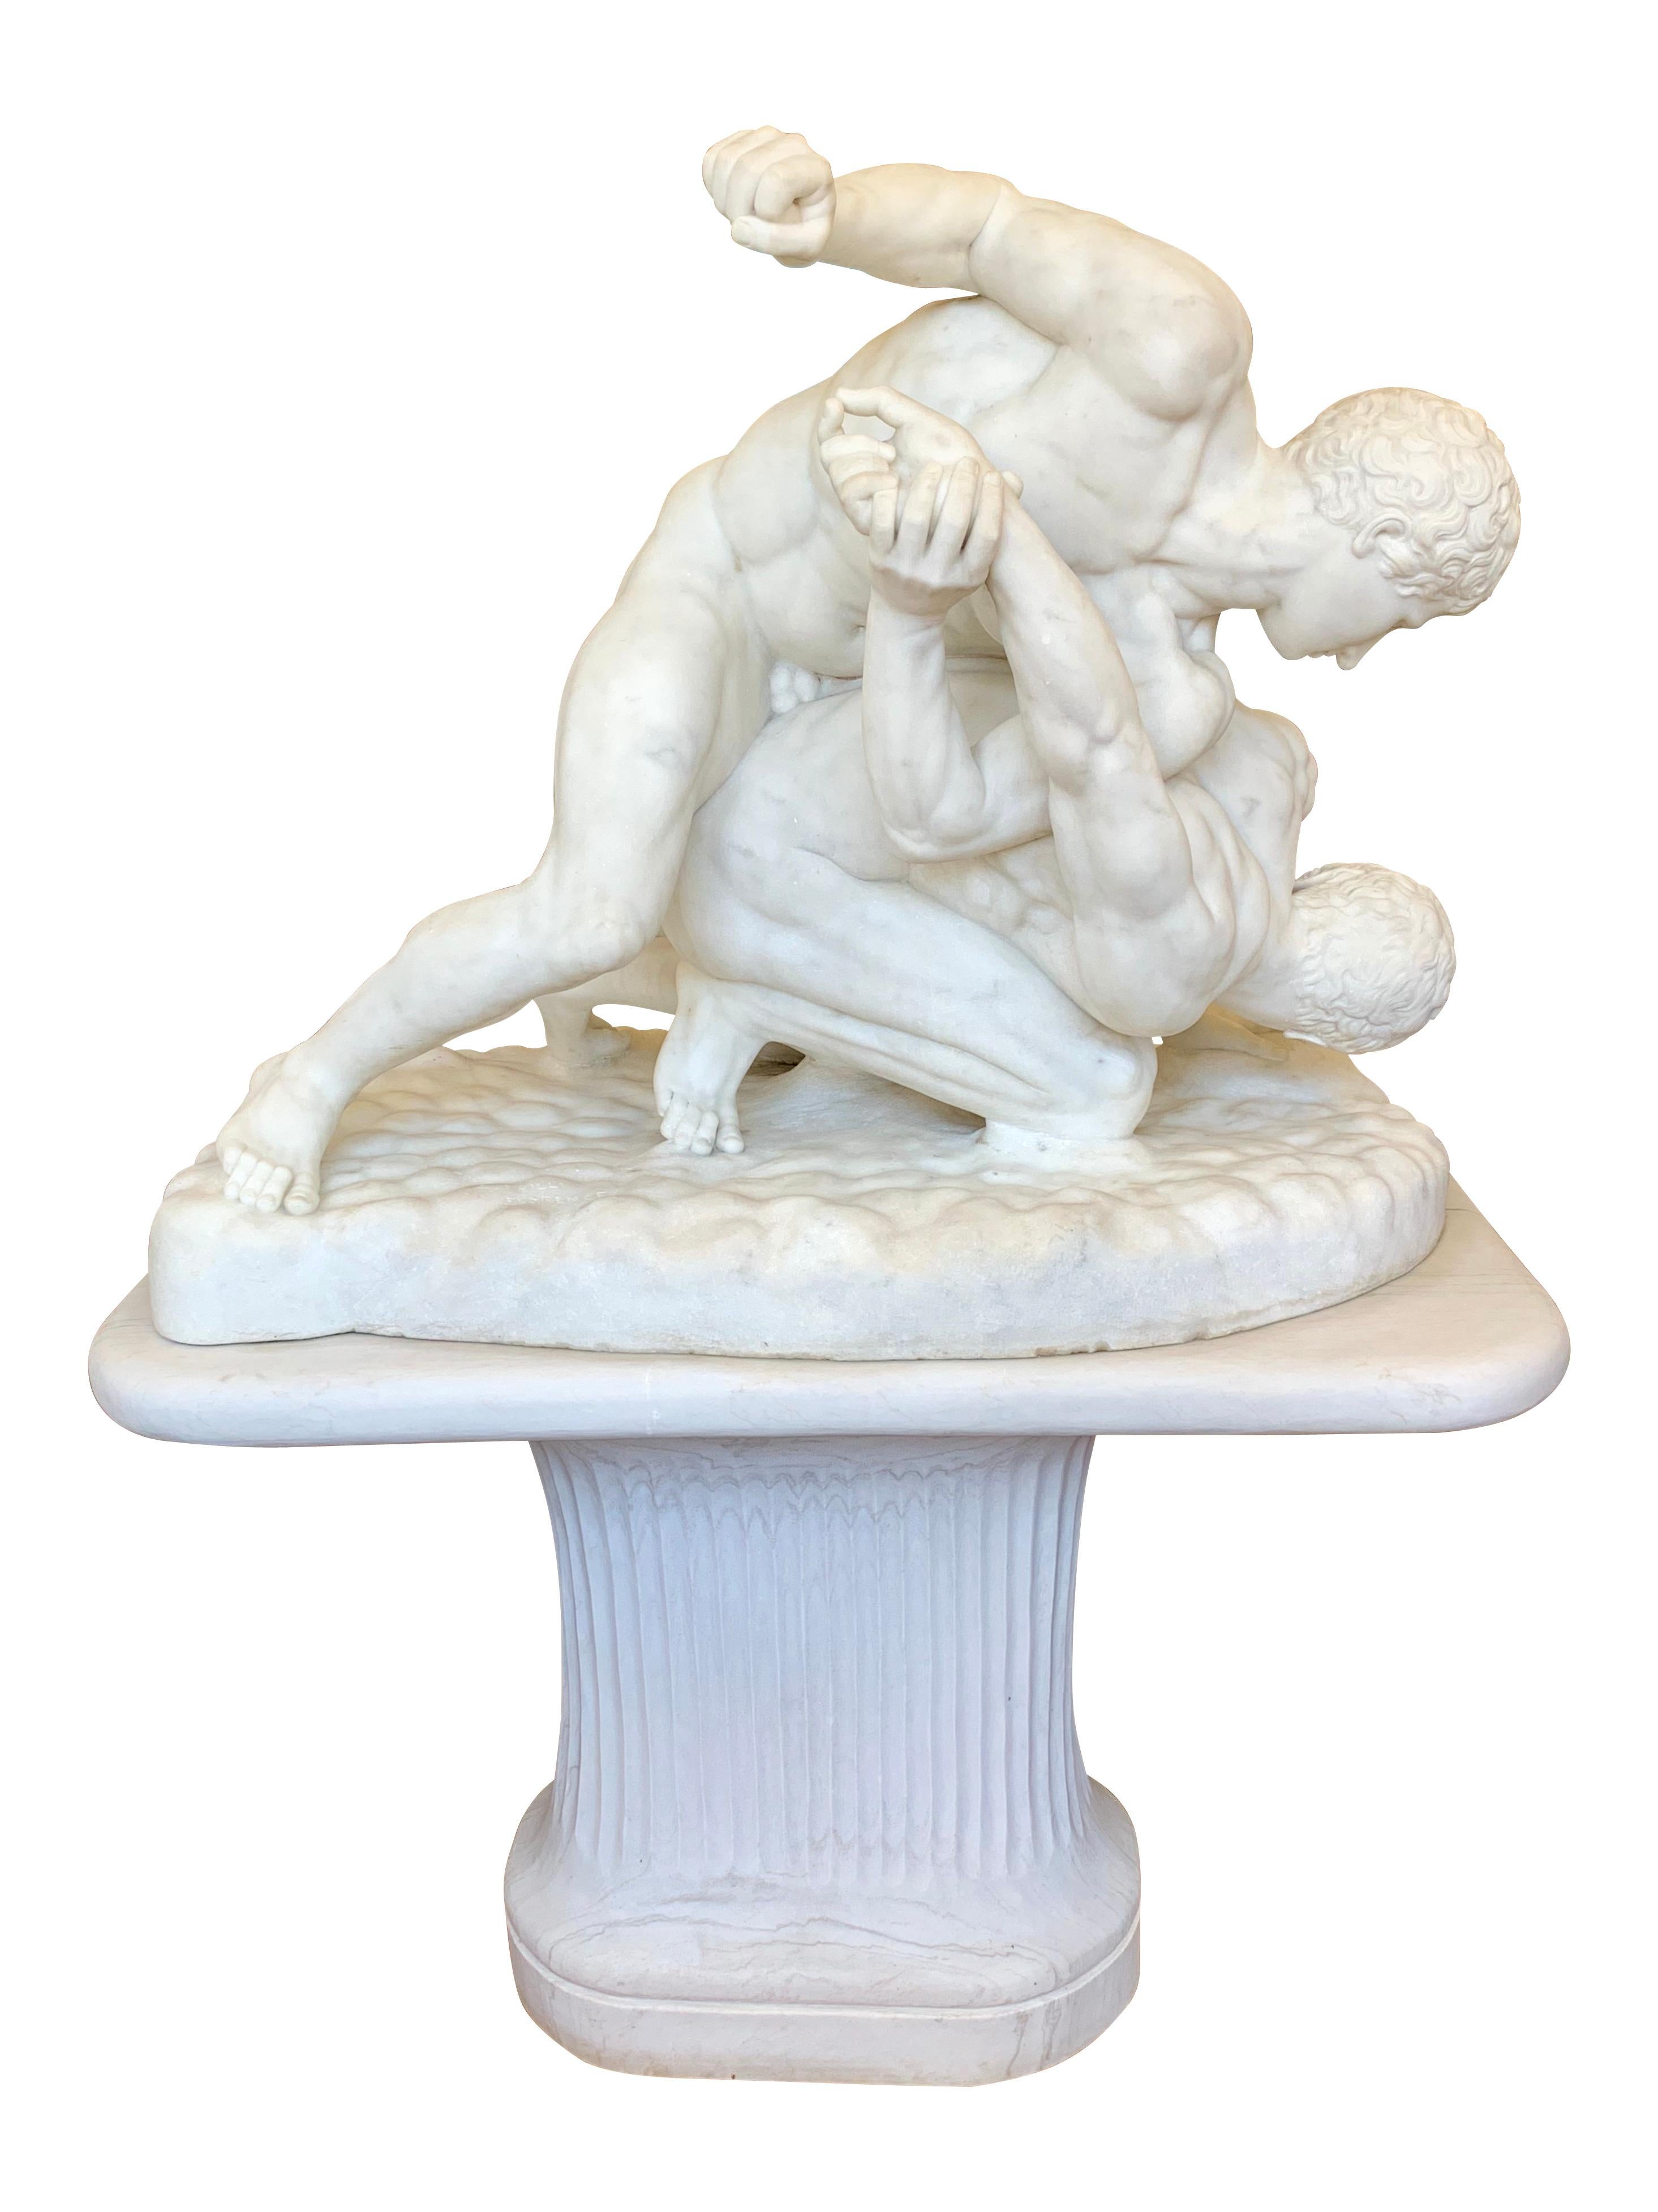 Life Size 19th Century Italian White Marble Sculpture Titled "The Wrestlers"  For Sale